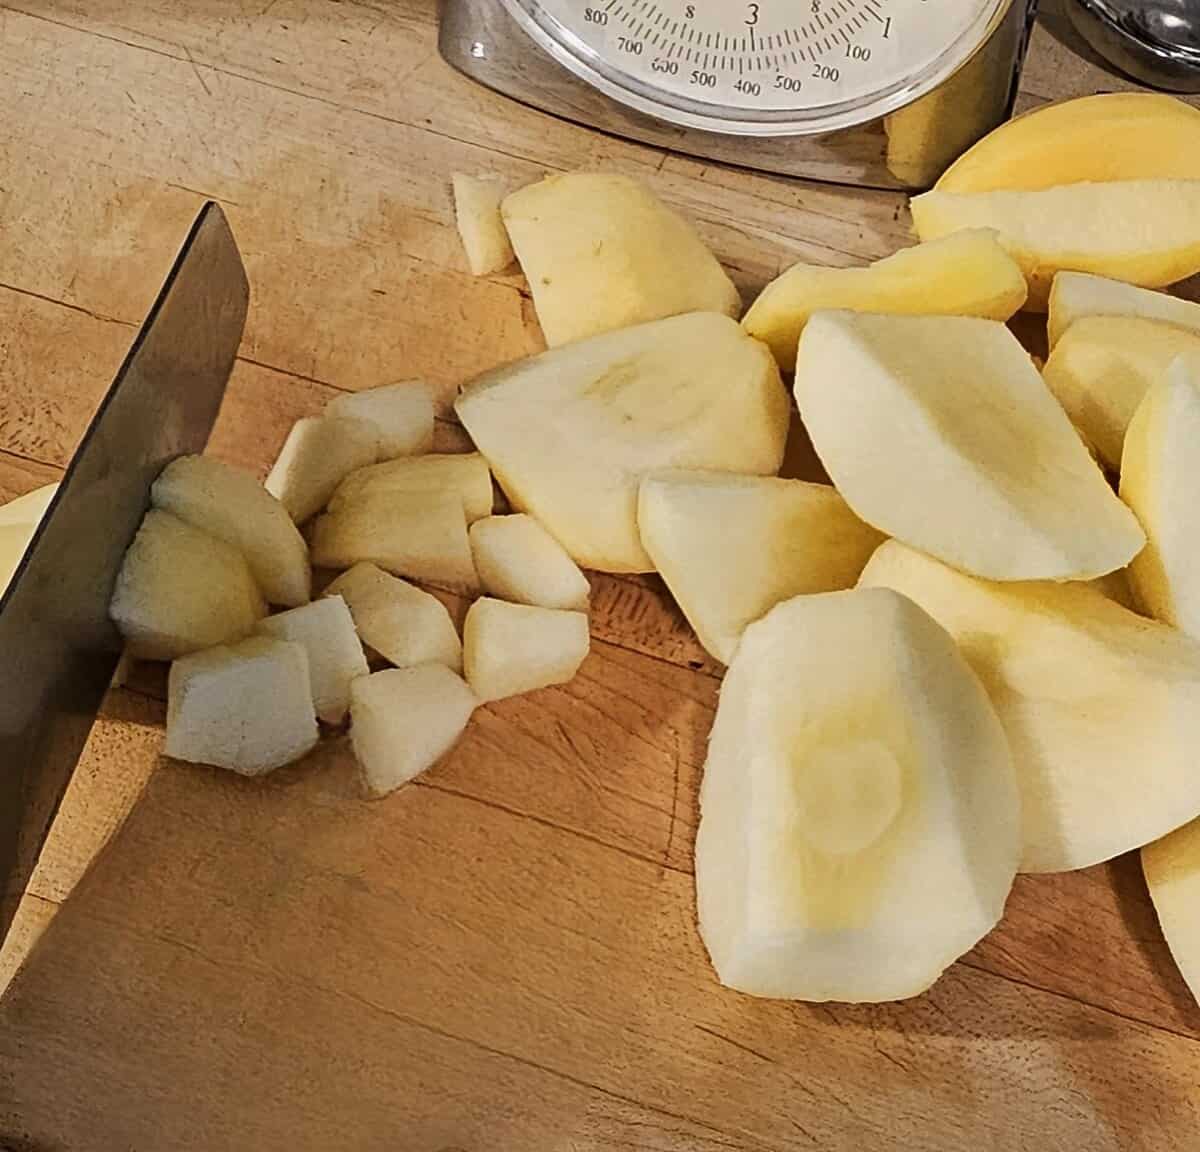 cut and cored apple segments being cut into smaller, 1 inch sized pieces